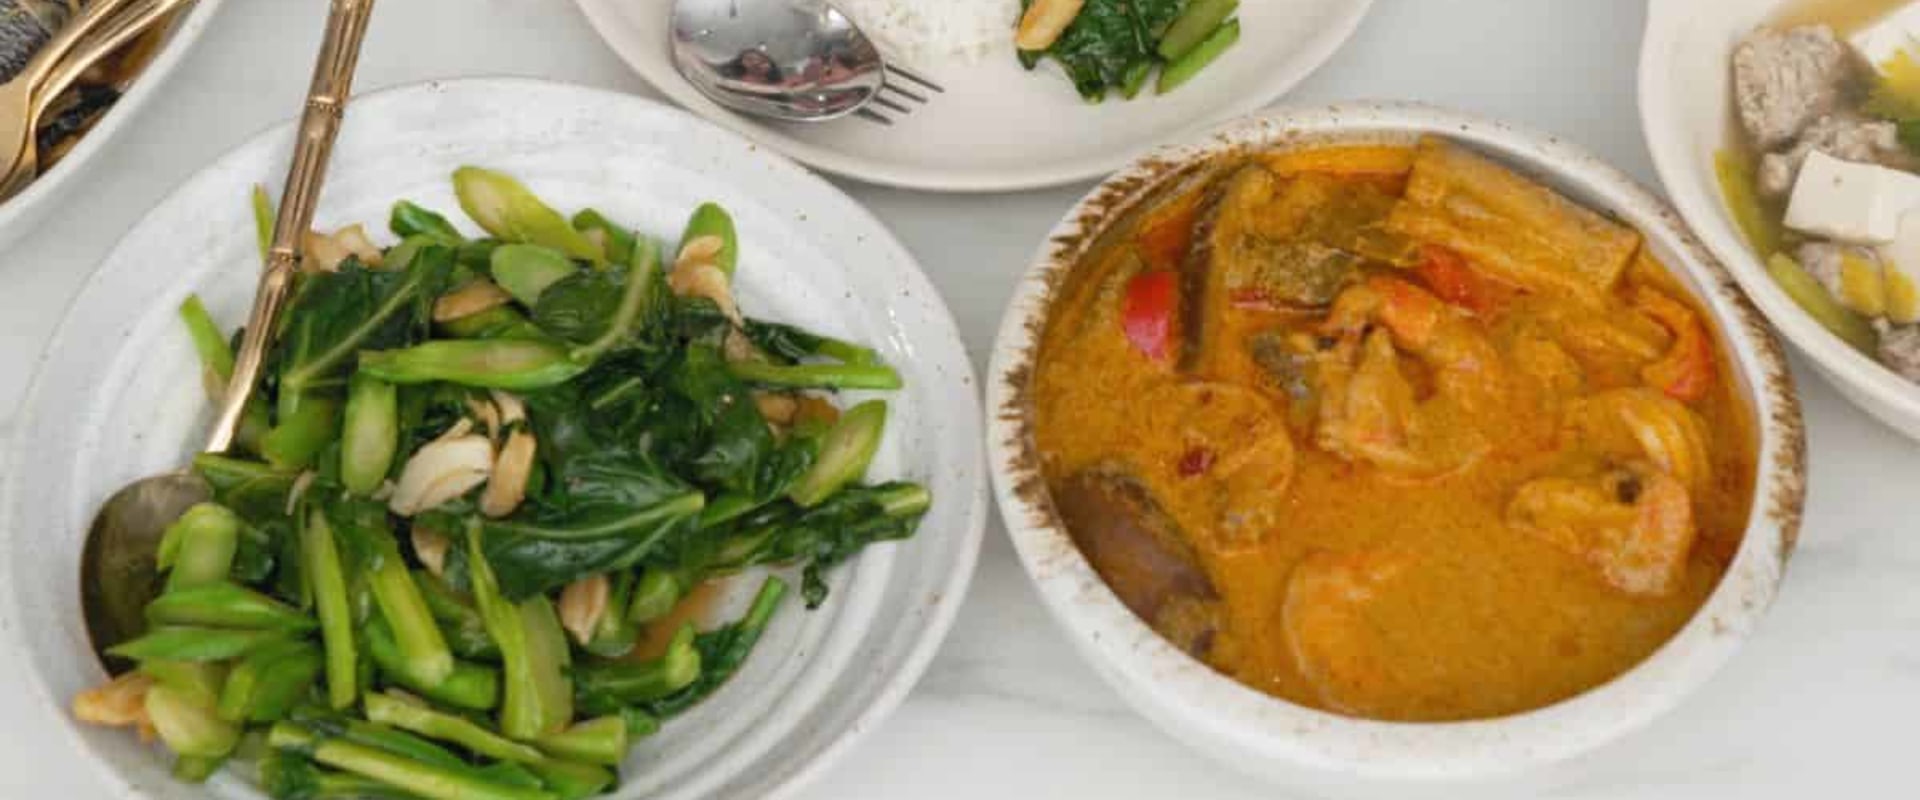 A Comprehensive Guide to Choosing the Best Thai Food